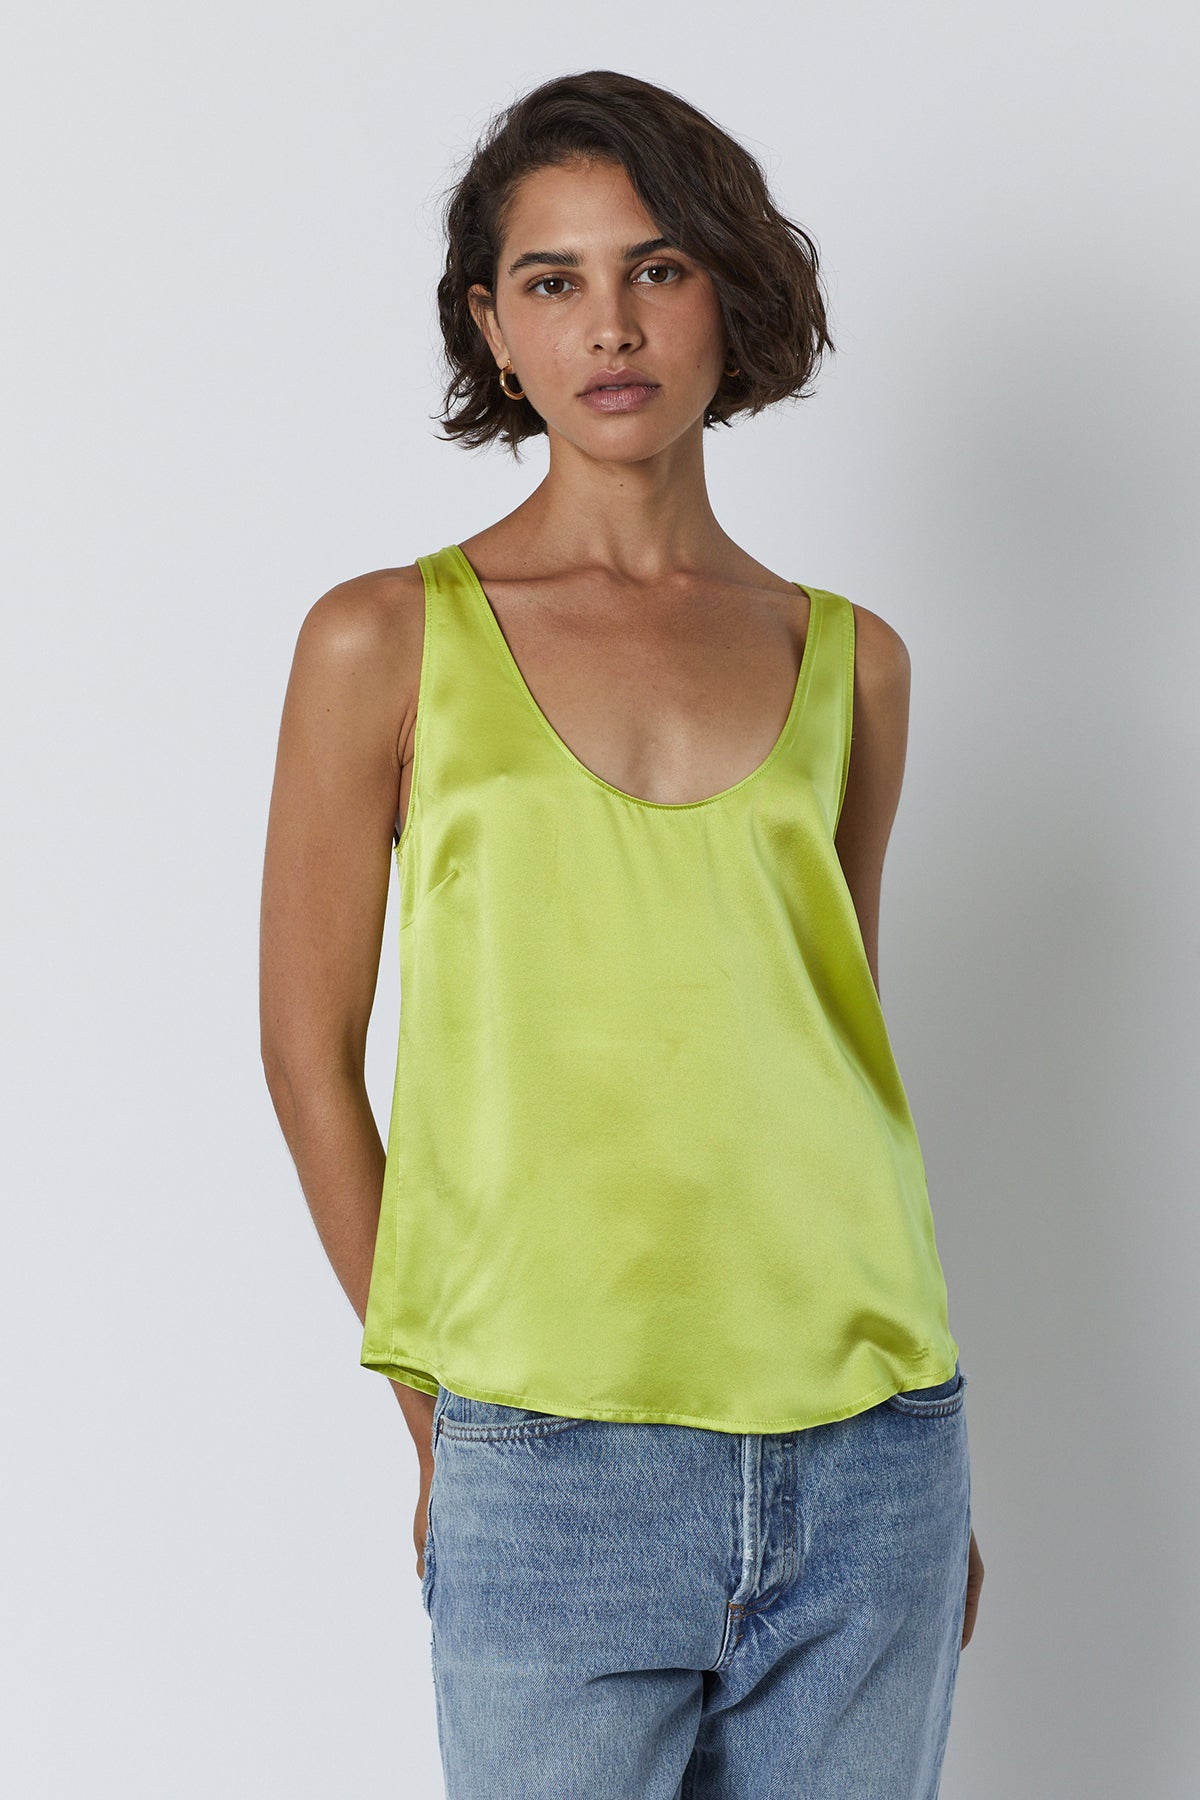 Nolita Tank Top in lime green with blue denim front-26007163502785